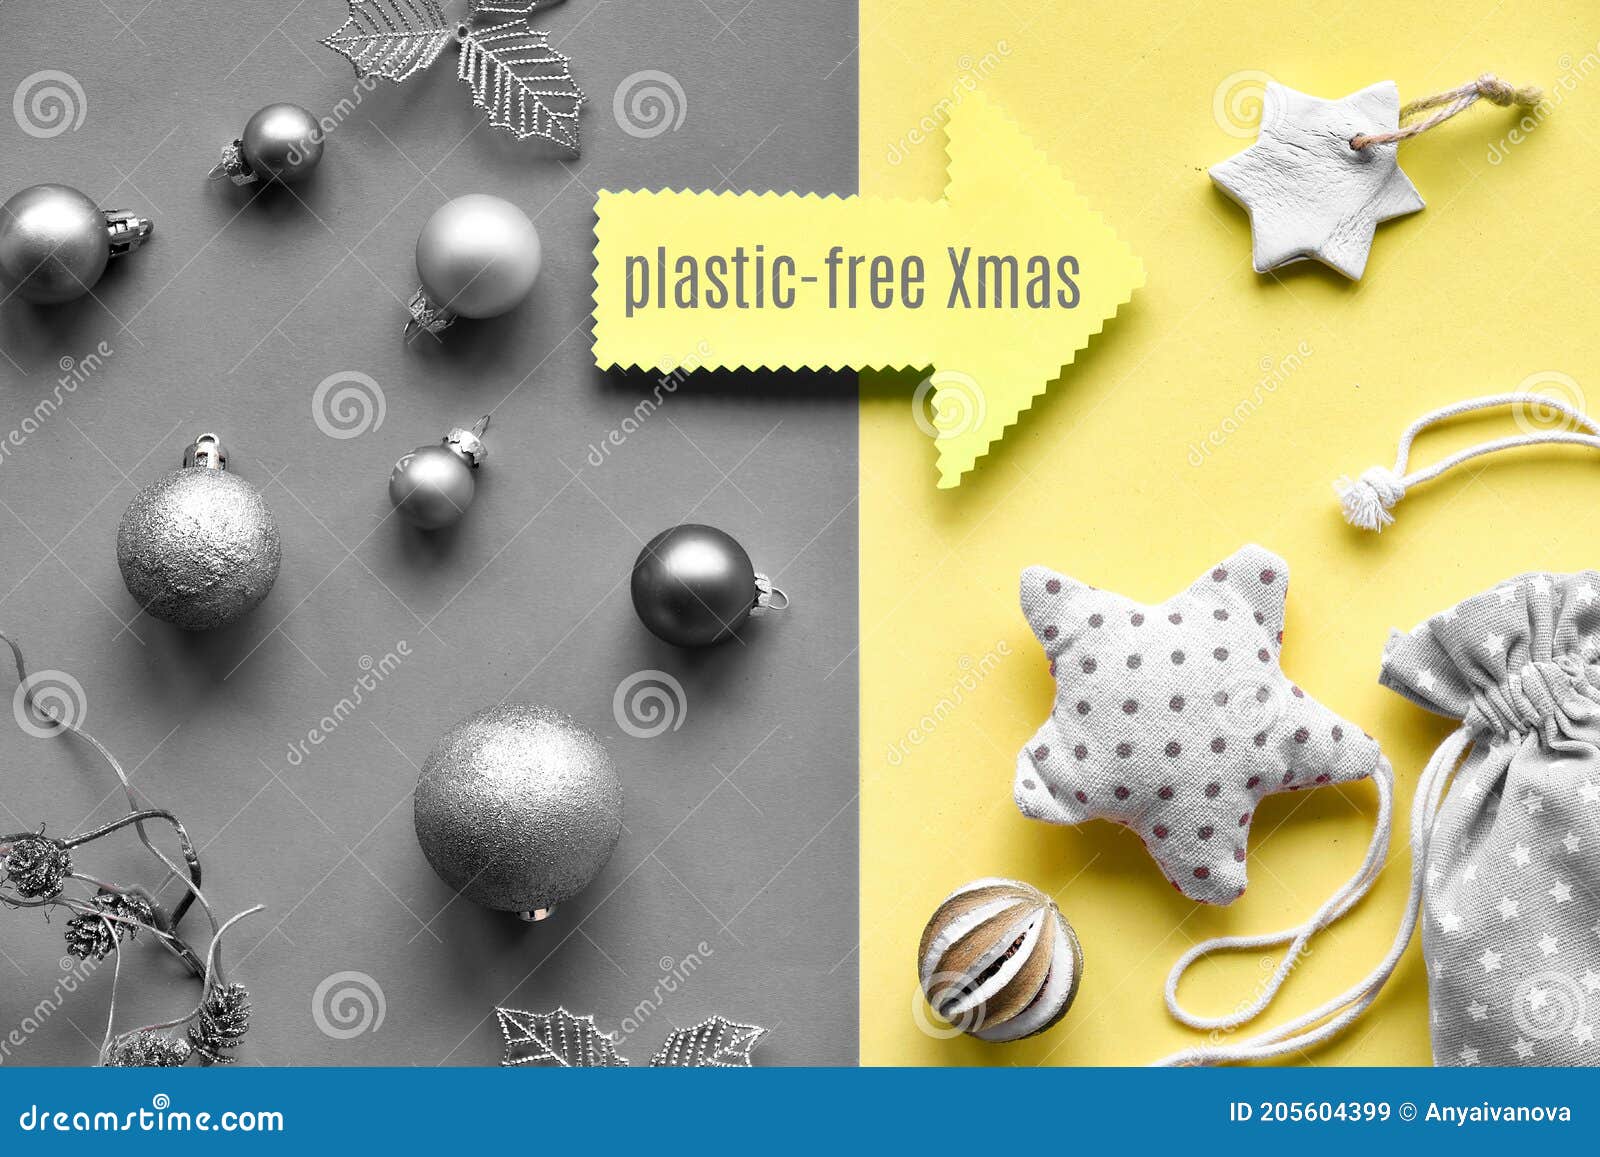 Plastic-free Xmas Concept. Change from Plastic Toys To Sustainable ...